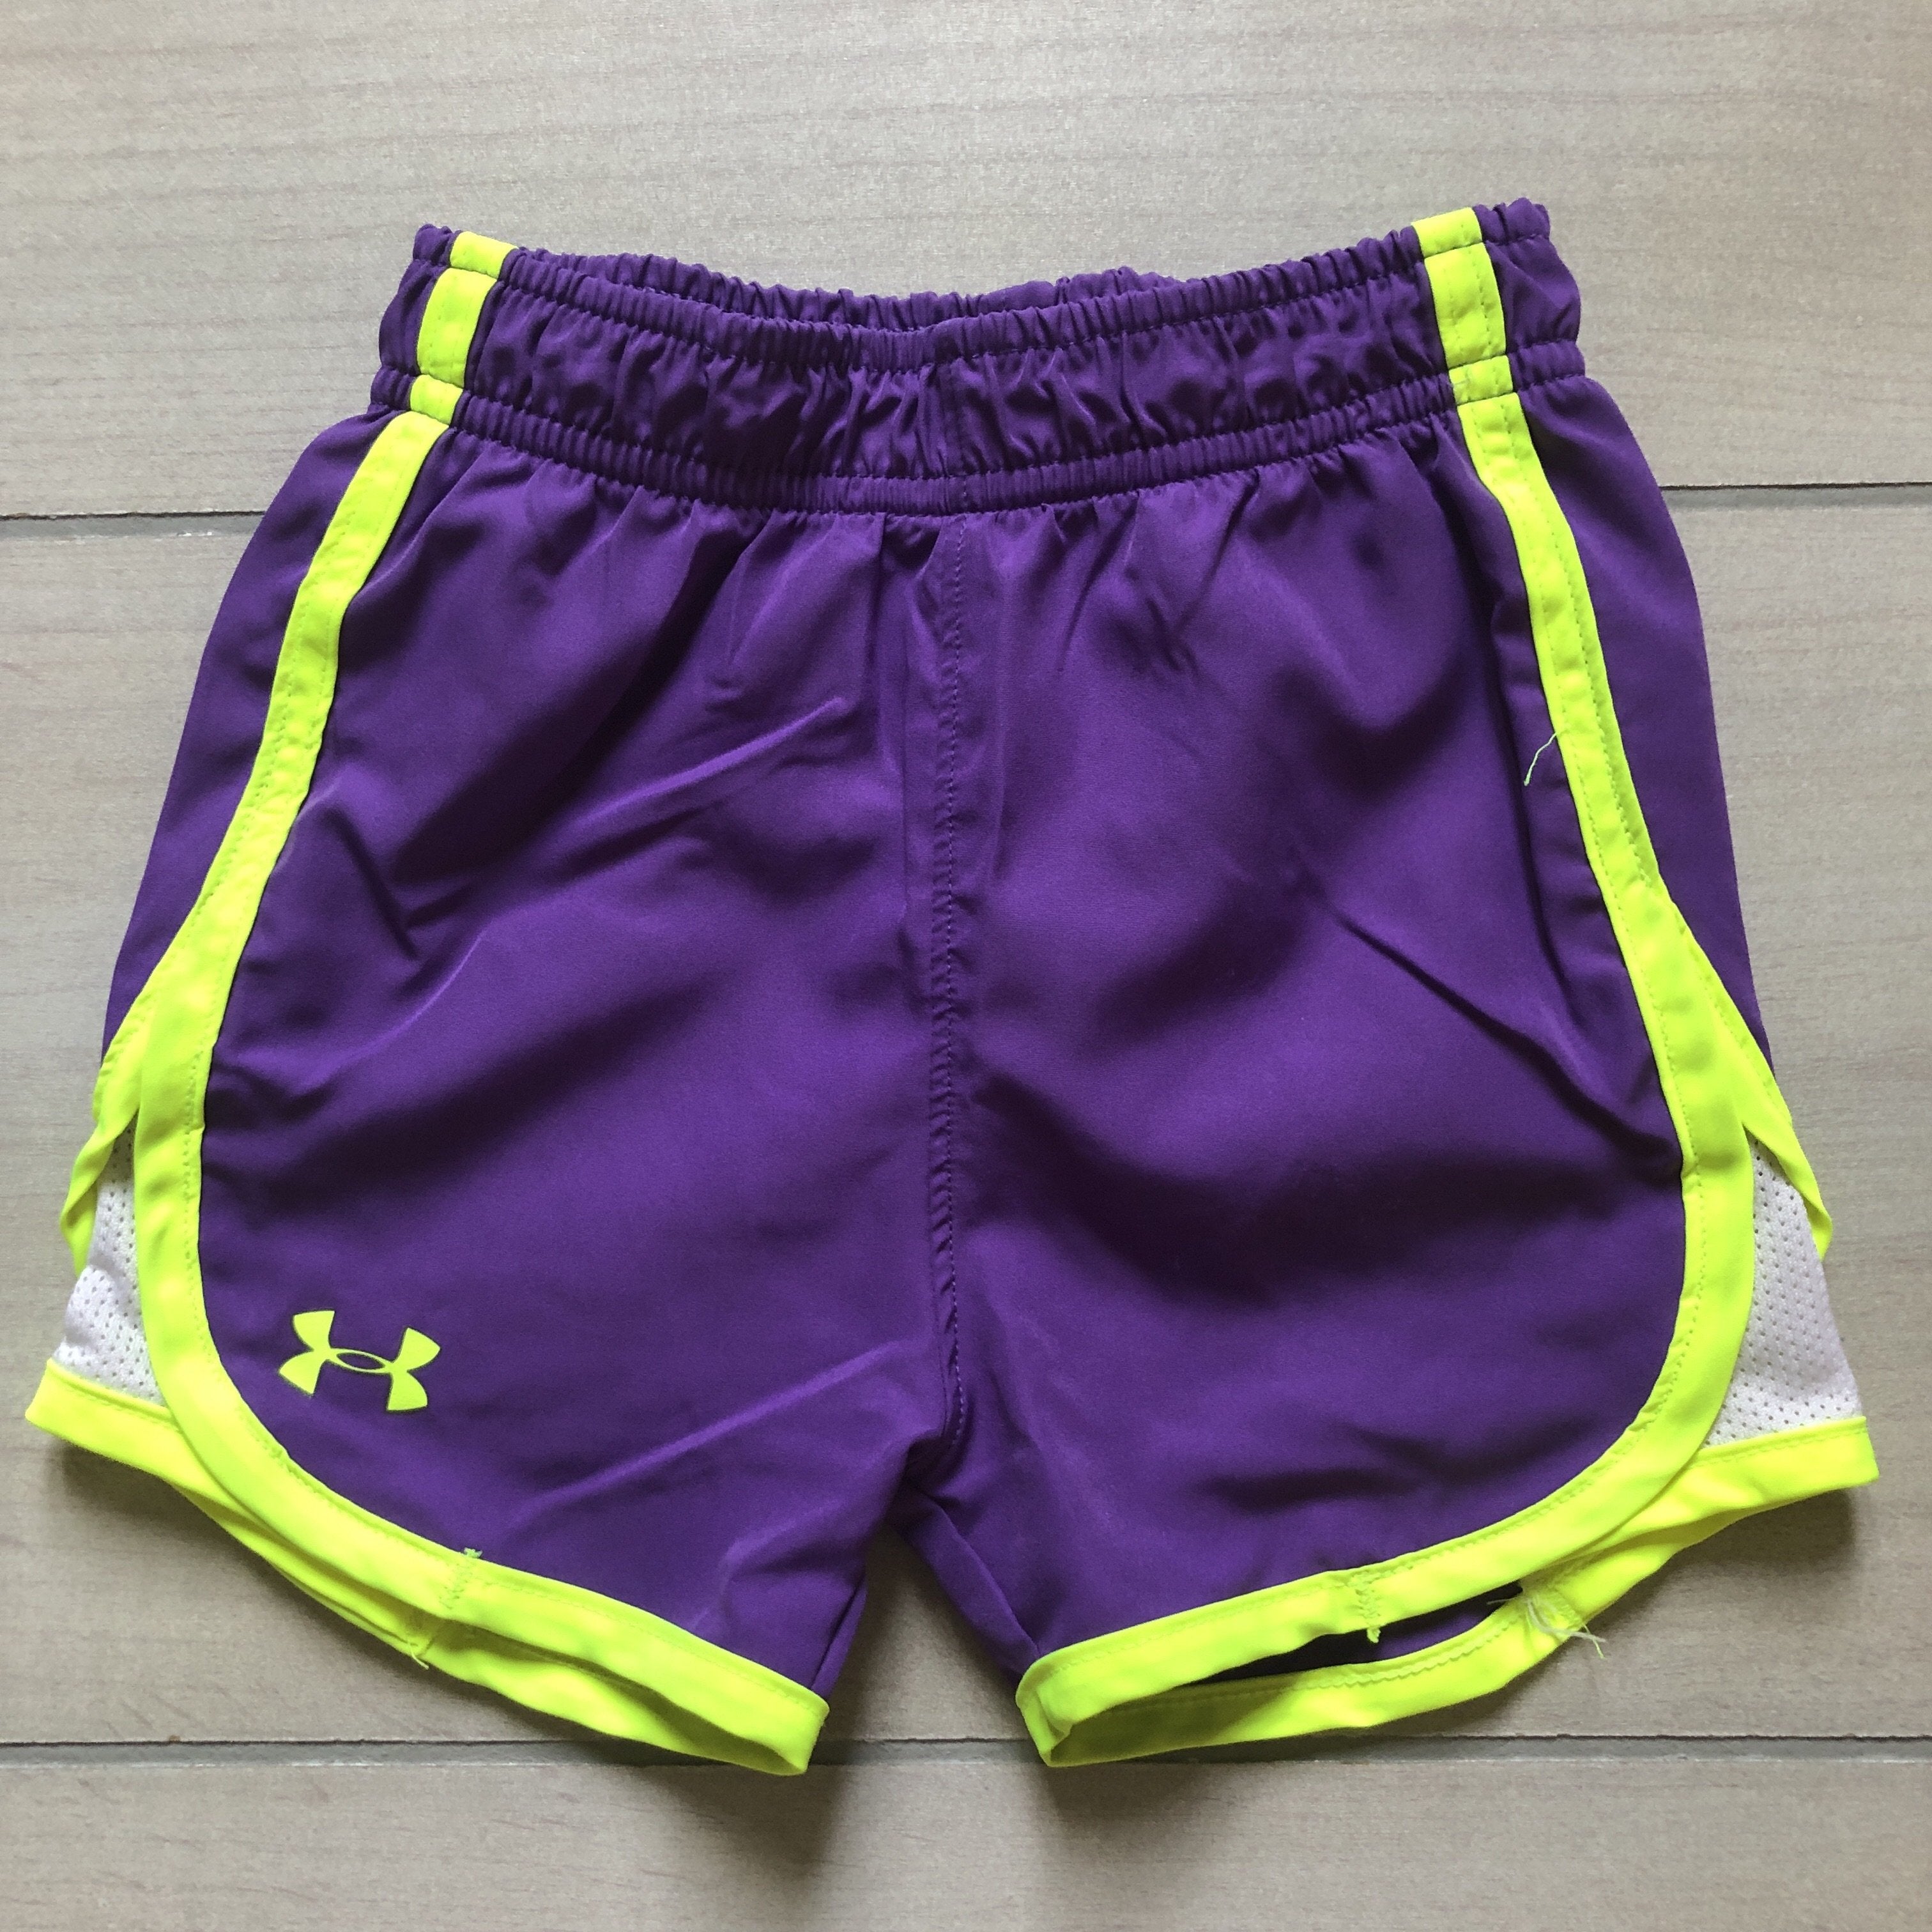 Under Armour Purple & Yellow Athletic Shorts